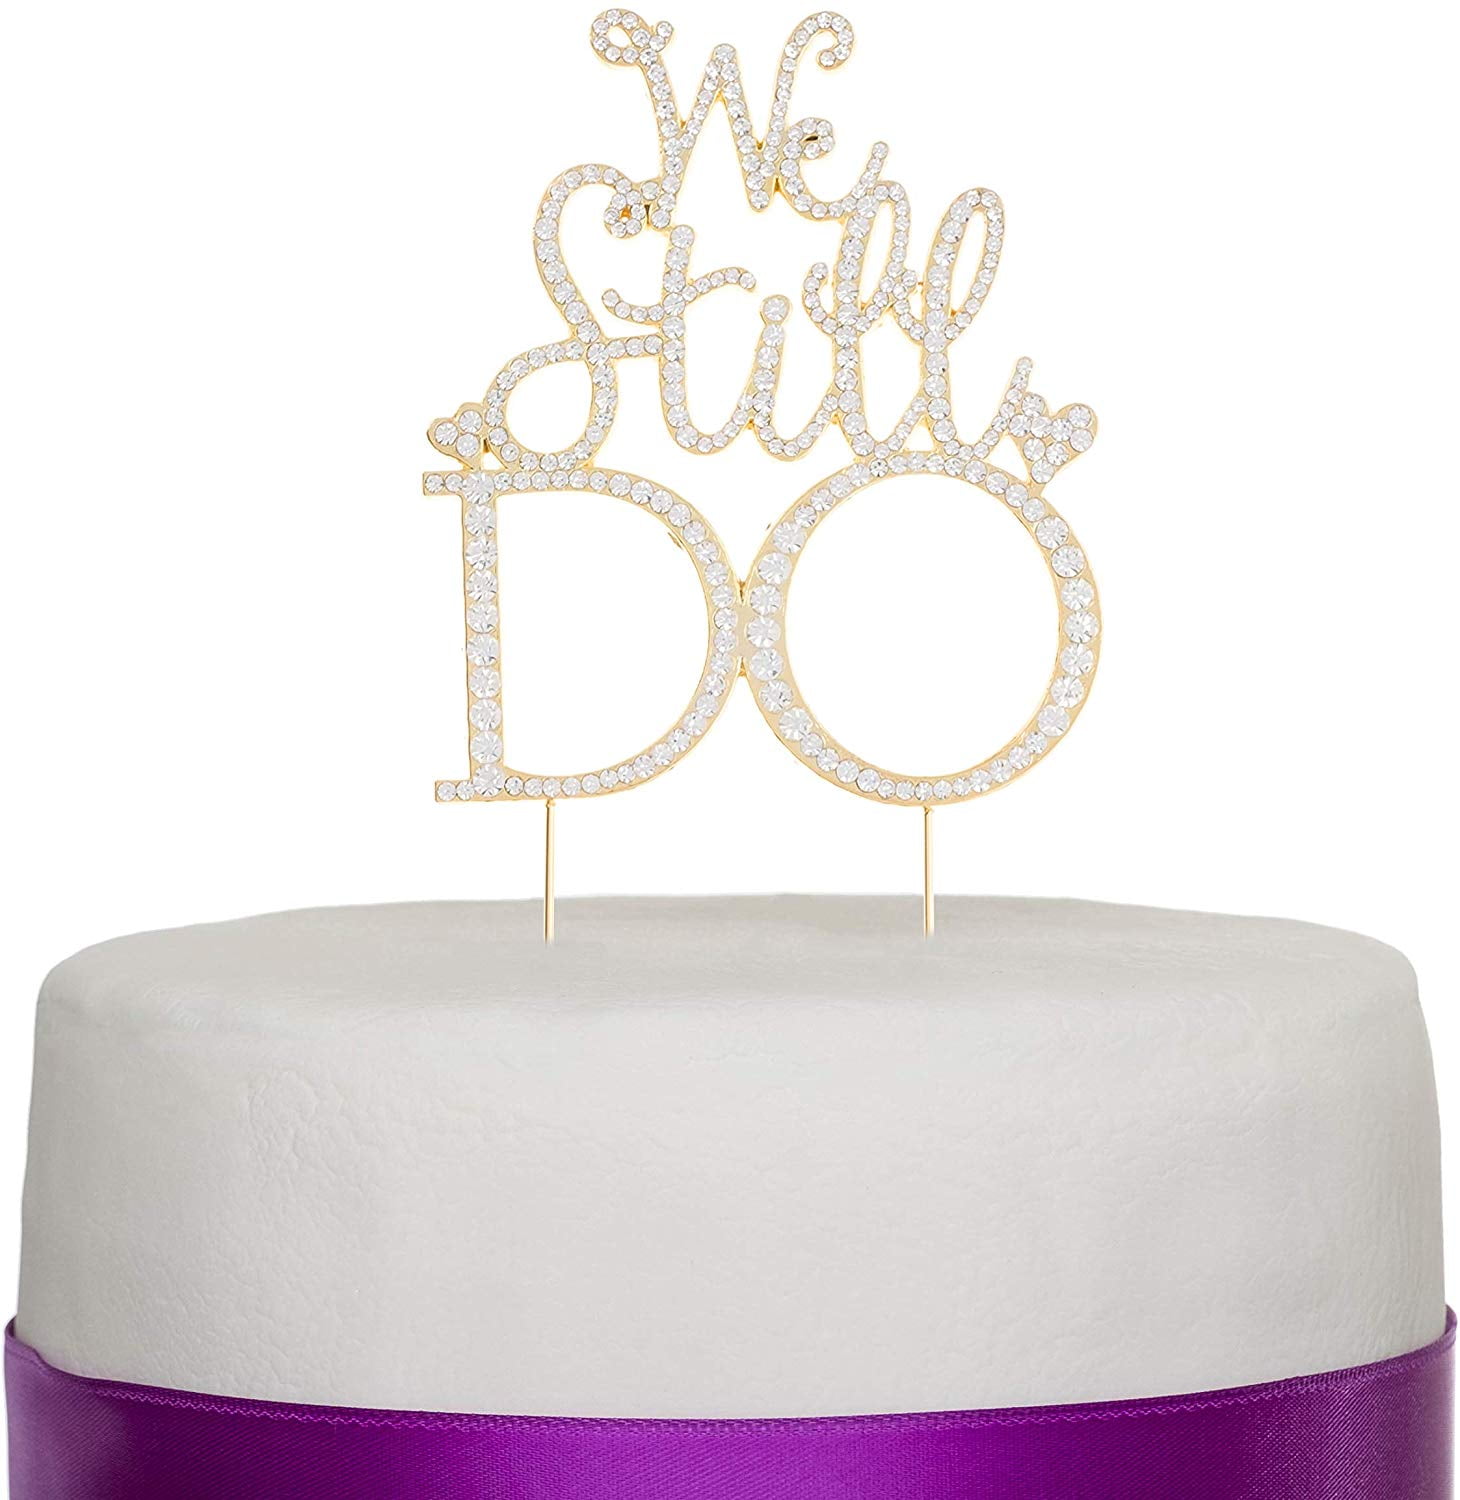 50th Gold Anniversary Vow Renewal Cake Topper made with crystal rhinestones 